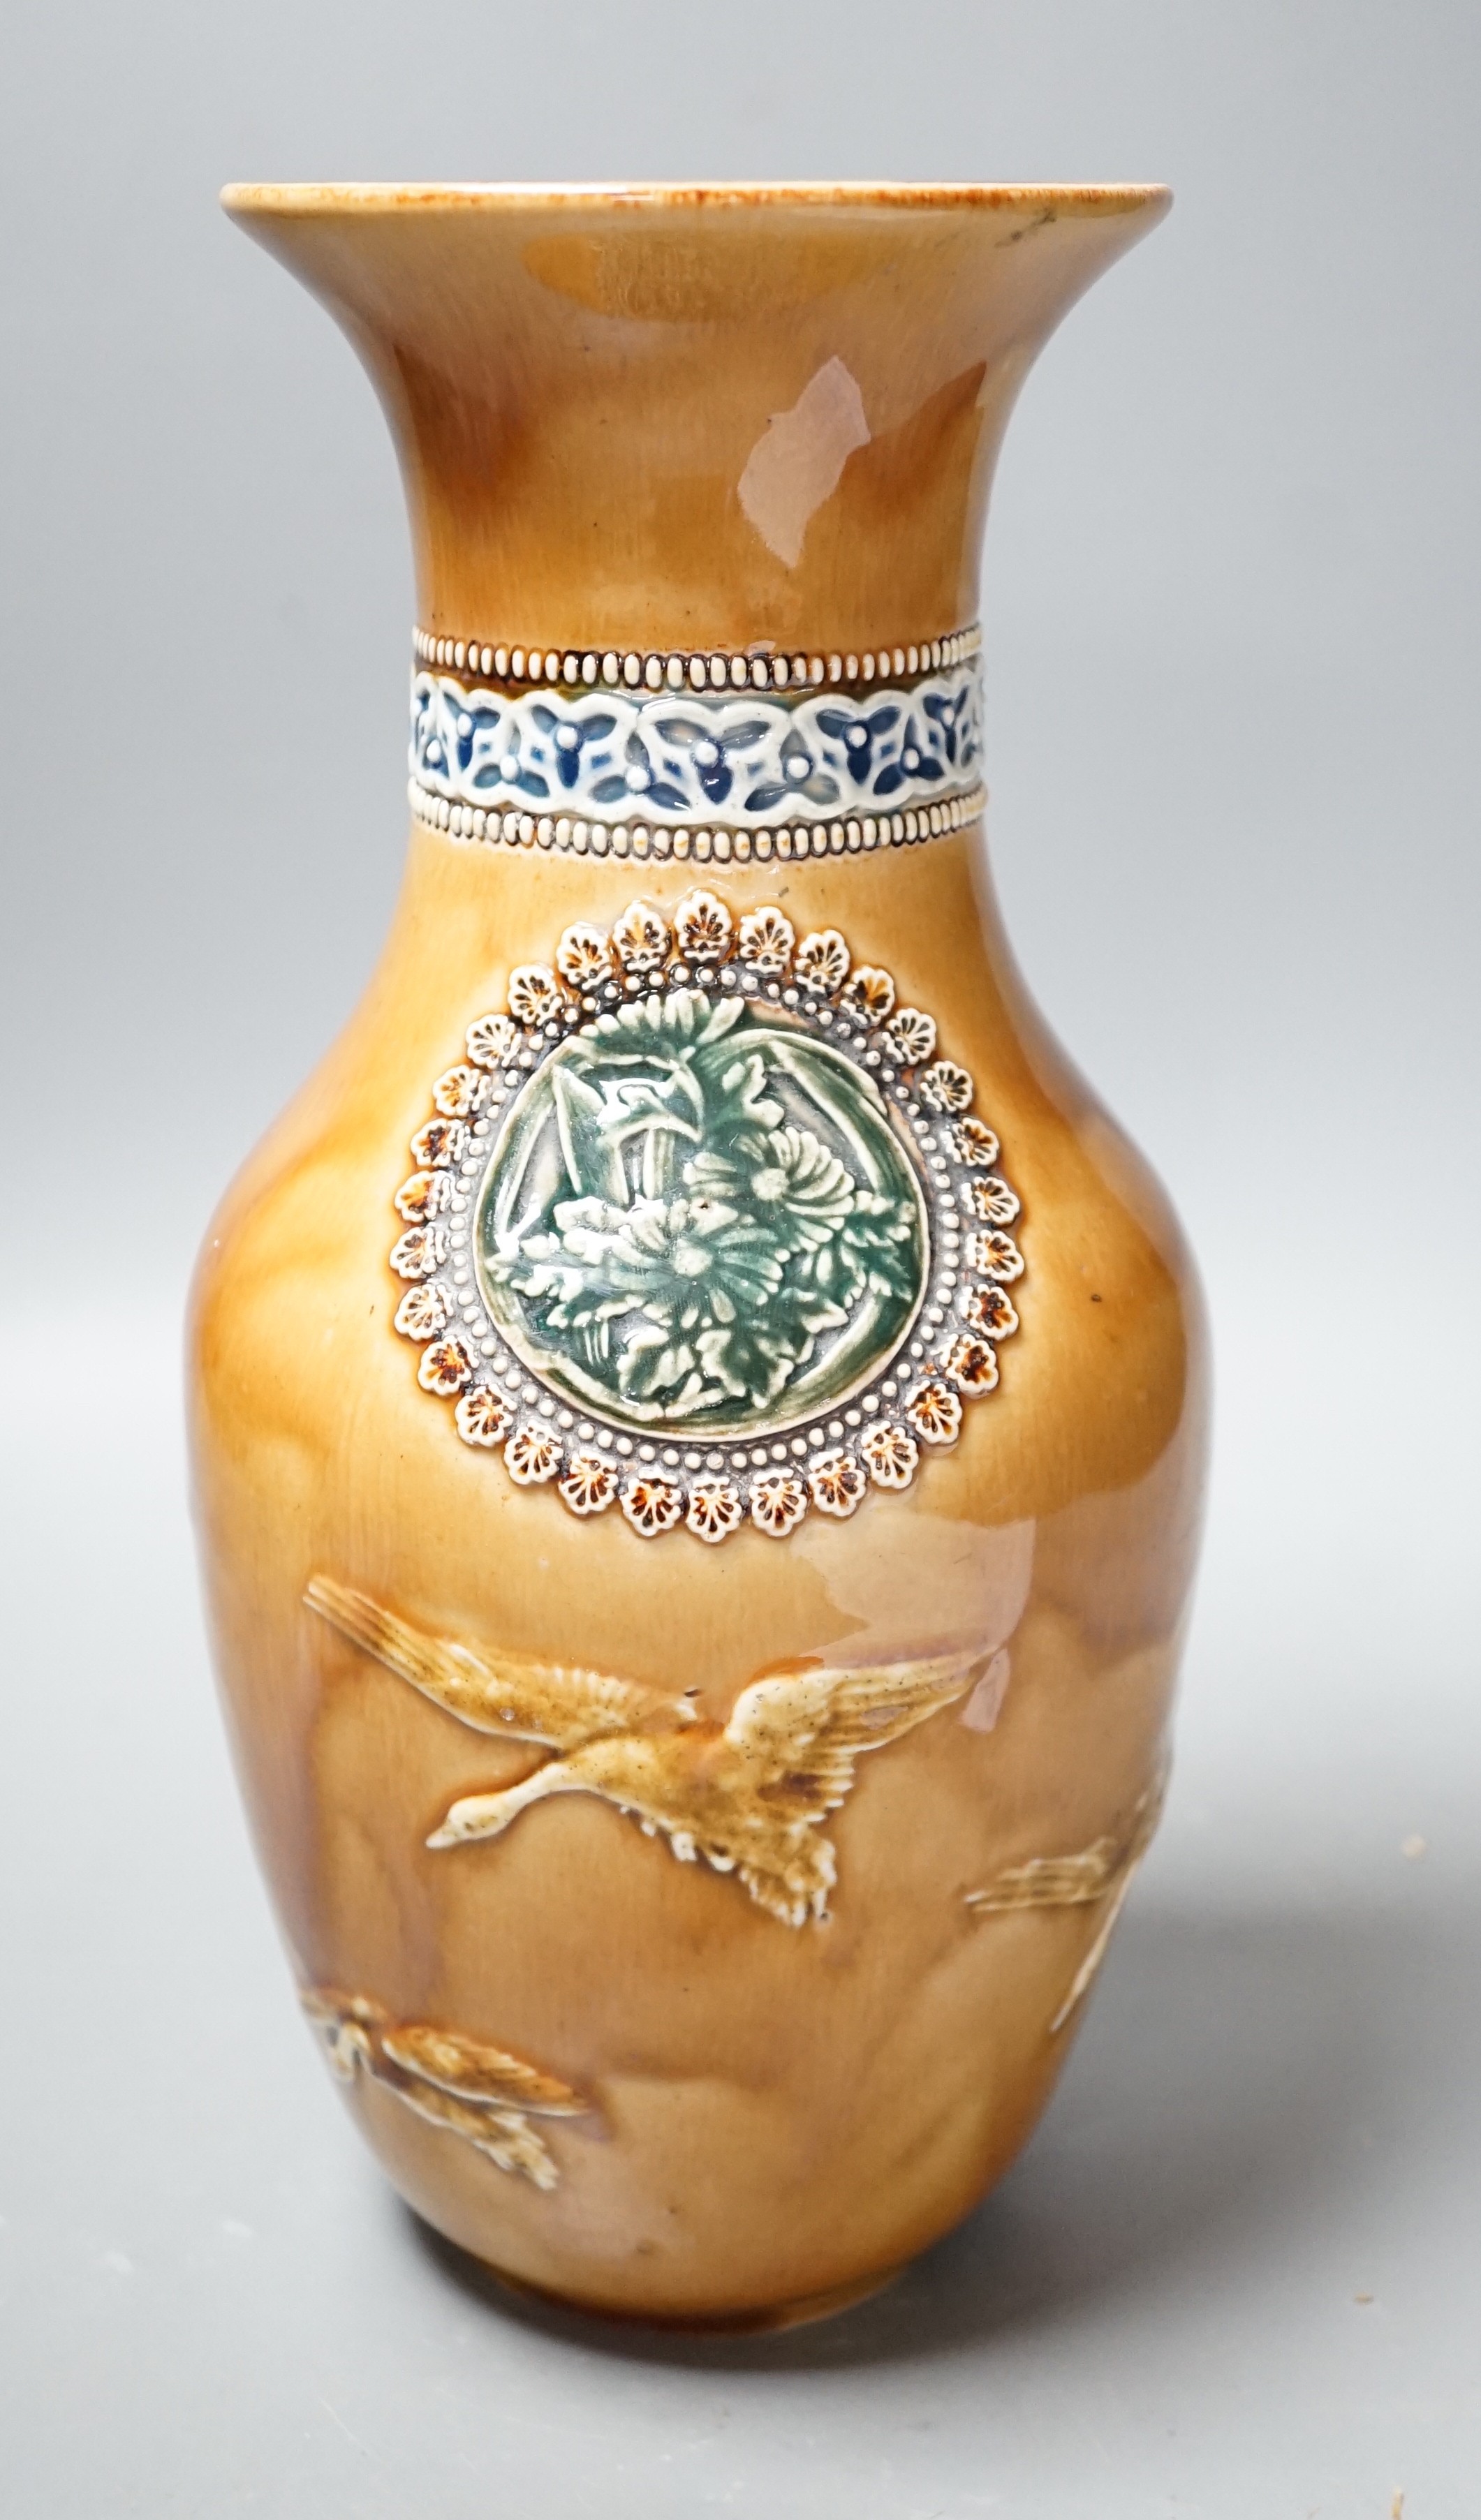 A Doulton Lambeth Aesthetic period stoneware vase, c.1885, decorated with Japanese cartouches and cranes in-flight, 27.5cms high